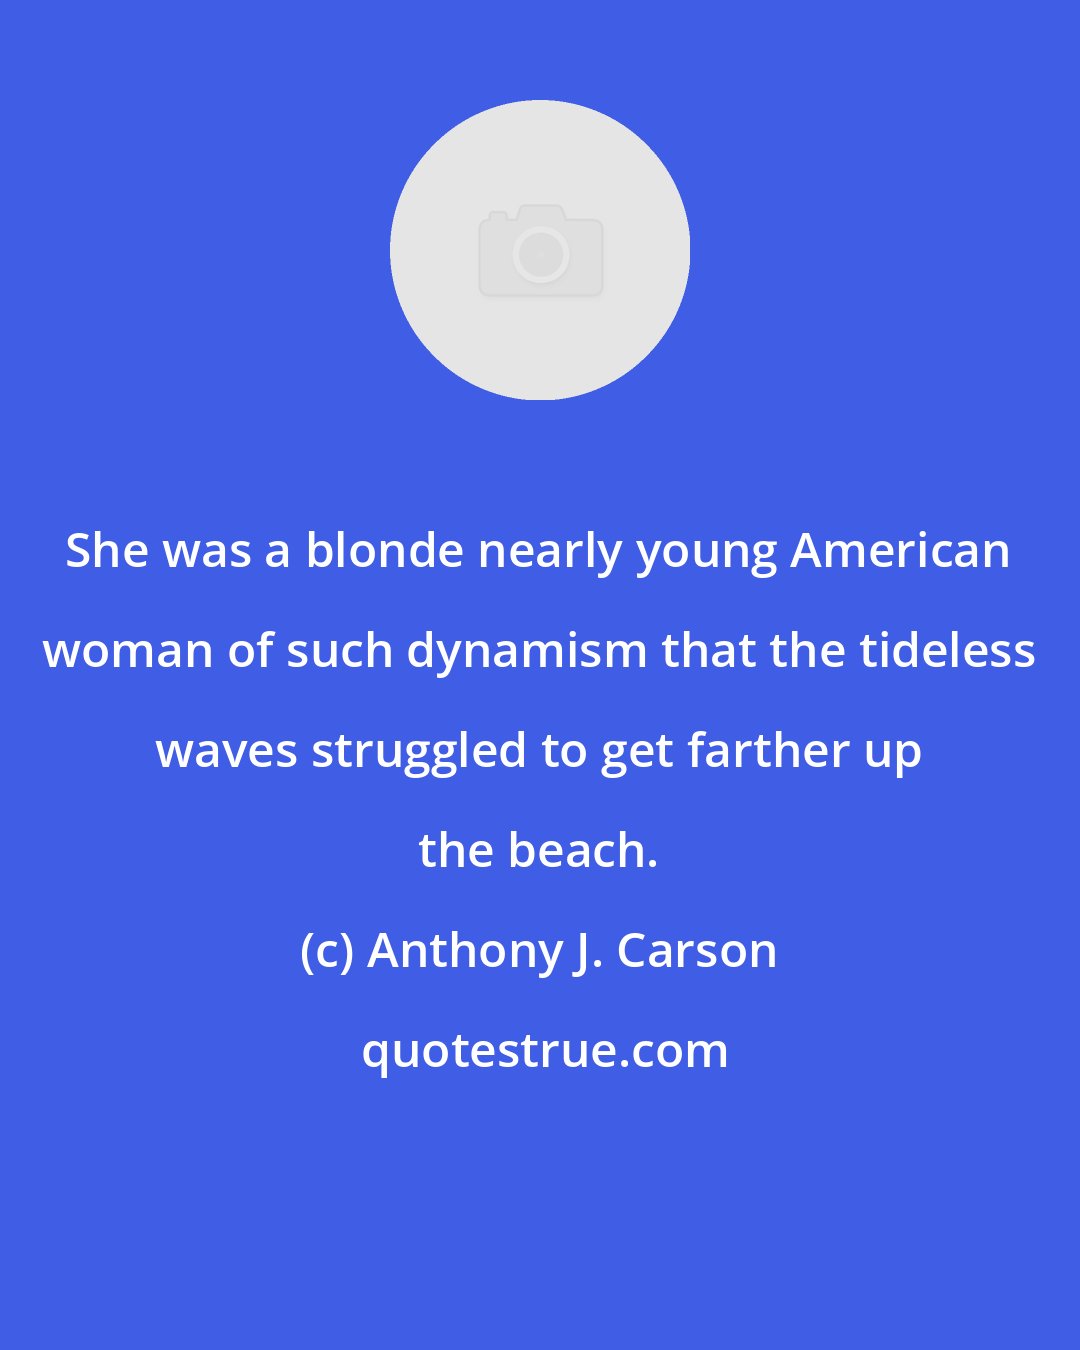 Anthony J. Carson: She was a blonde nearly young American woman of such dynamism that the tideless waves struggled to get farther up the beach.